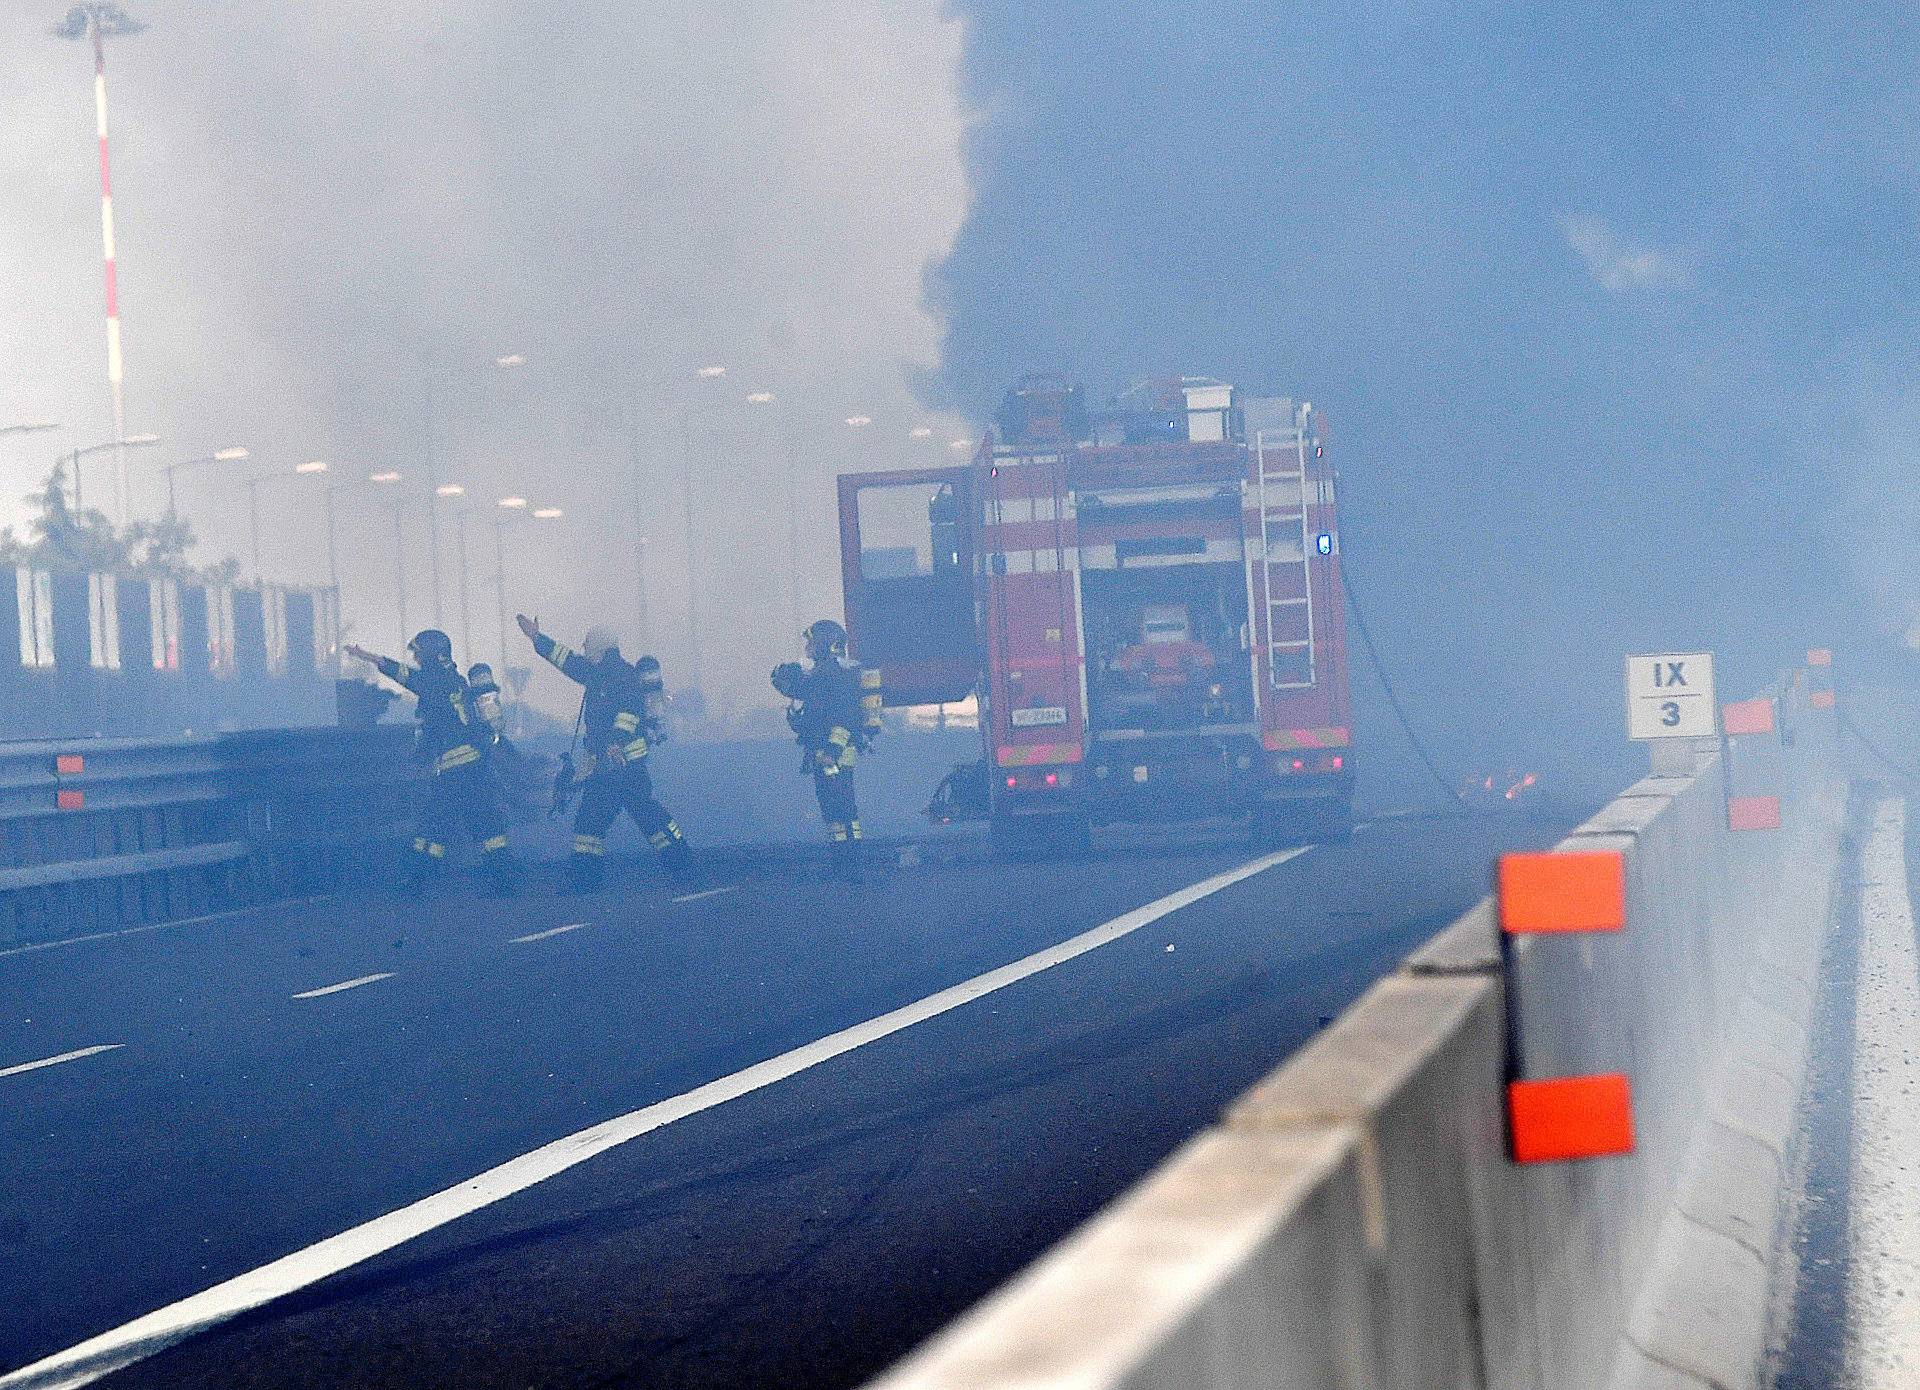 Firefighters work on the motorway after an accident caused a large explosion and fire at Borgo Panigale, on the outskirts of Bologna